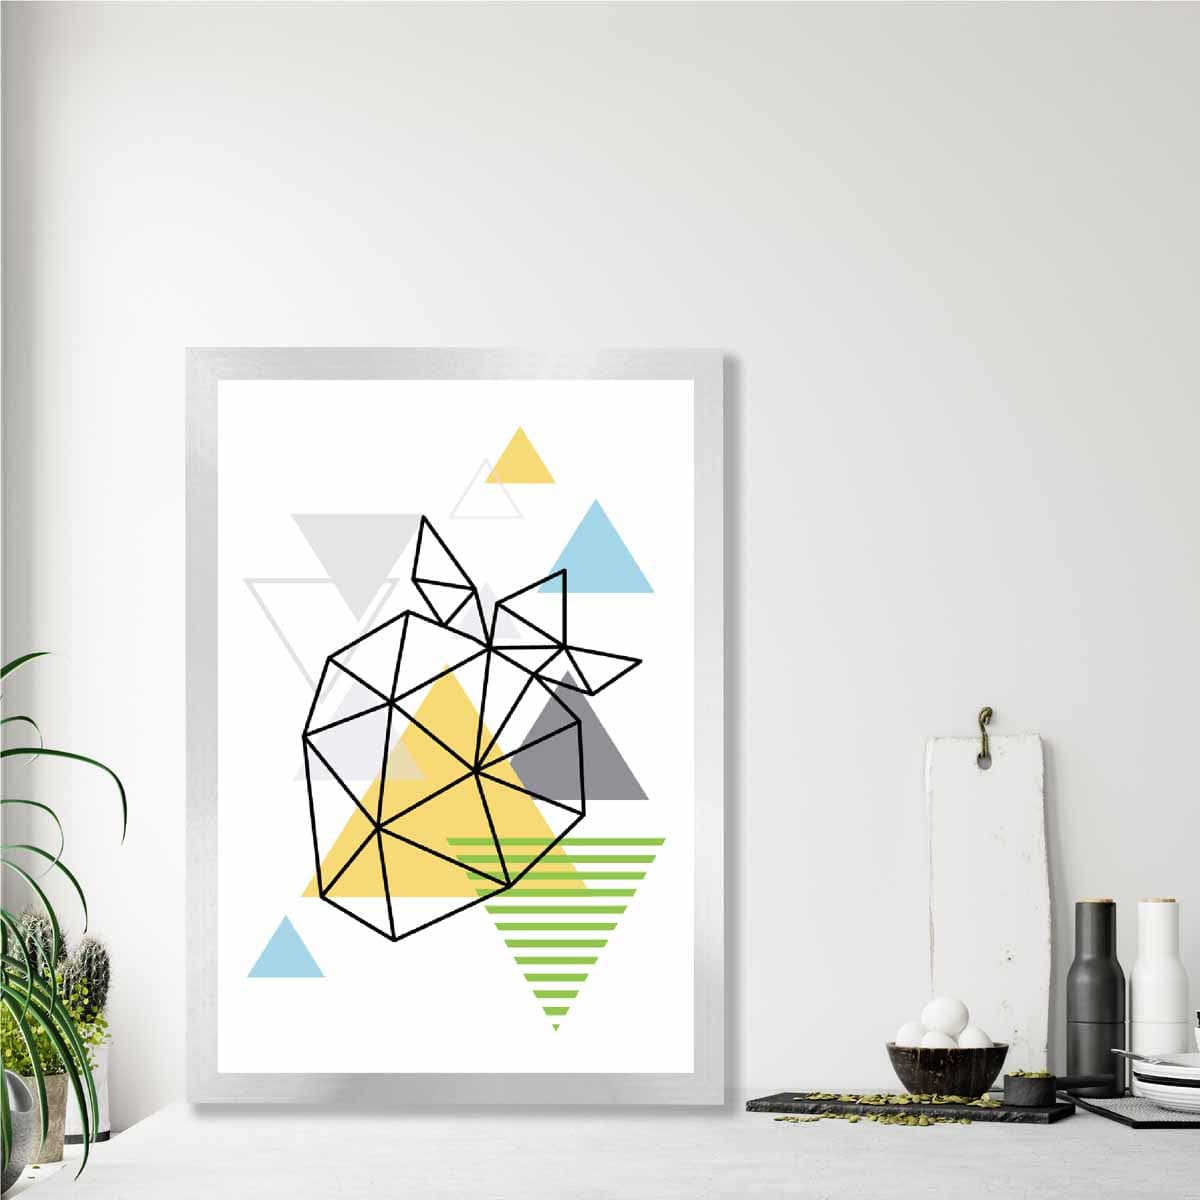 Geometric Fruit Line art Poster of Strawberry in Yellow Blue Green